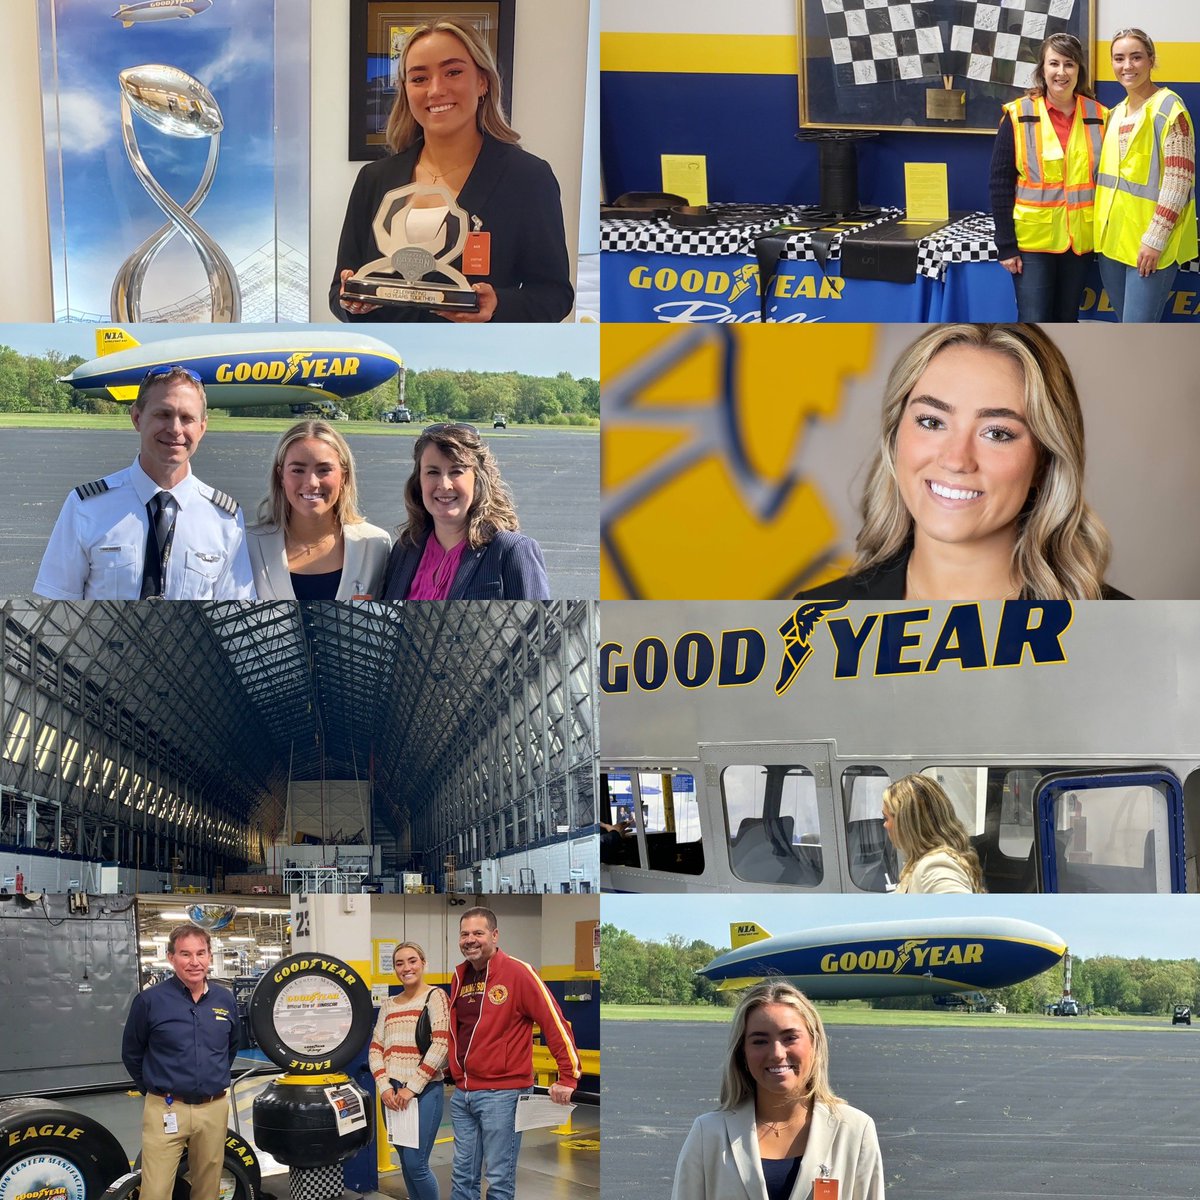 .@natalie_susa Sr Experience was w/ @goodyear & Mrs. Donohoe, Sr. Brand Mgr & great WJ mom. Natalie met with many mktg personnel, toured @GoodyearBlimp, @NASCAR in Akron, held @CottonBowlGame trophy & had prof. headshots taken! Nat will go to @UMNews in Fall #AllEncountersMatter